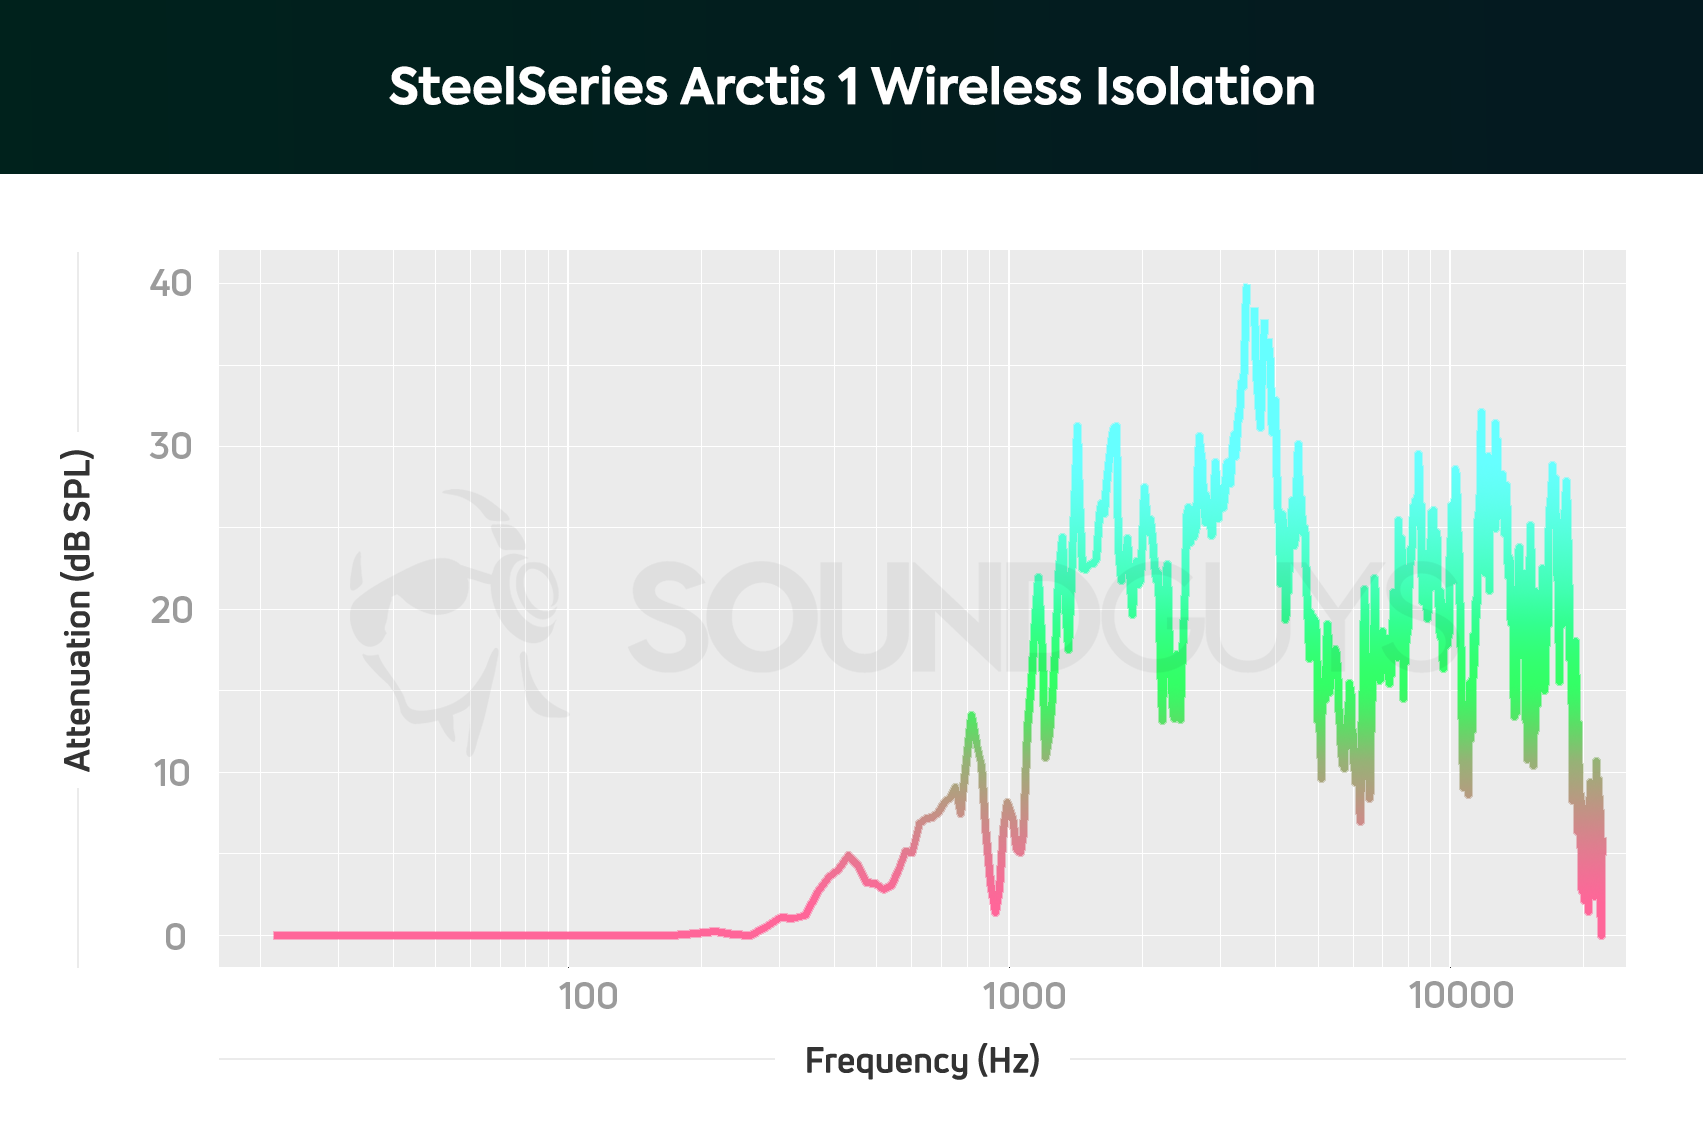 An isolation chart for the SteelSeries Arctis 1 Wireless.